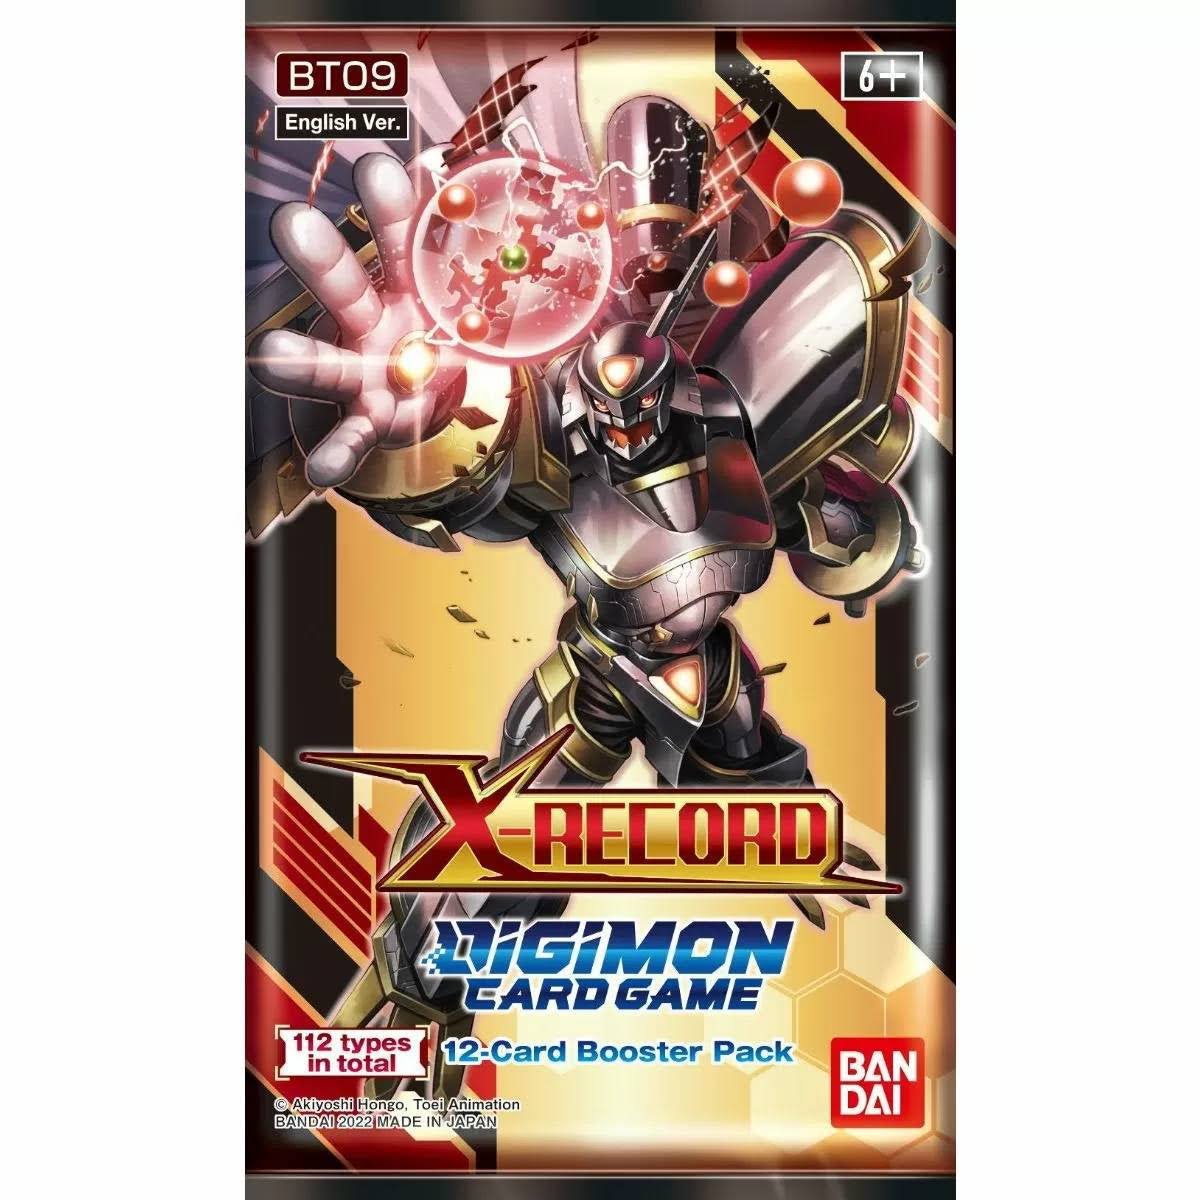 Digimon Card Game Series 09 x Record BT09 Booster Pack